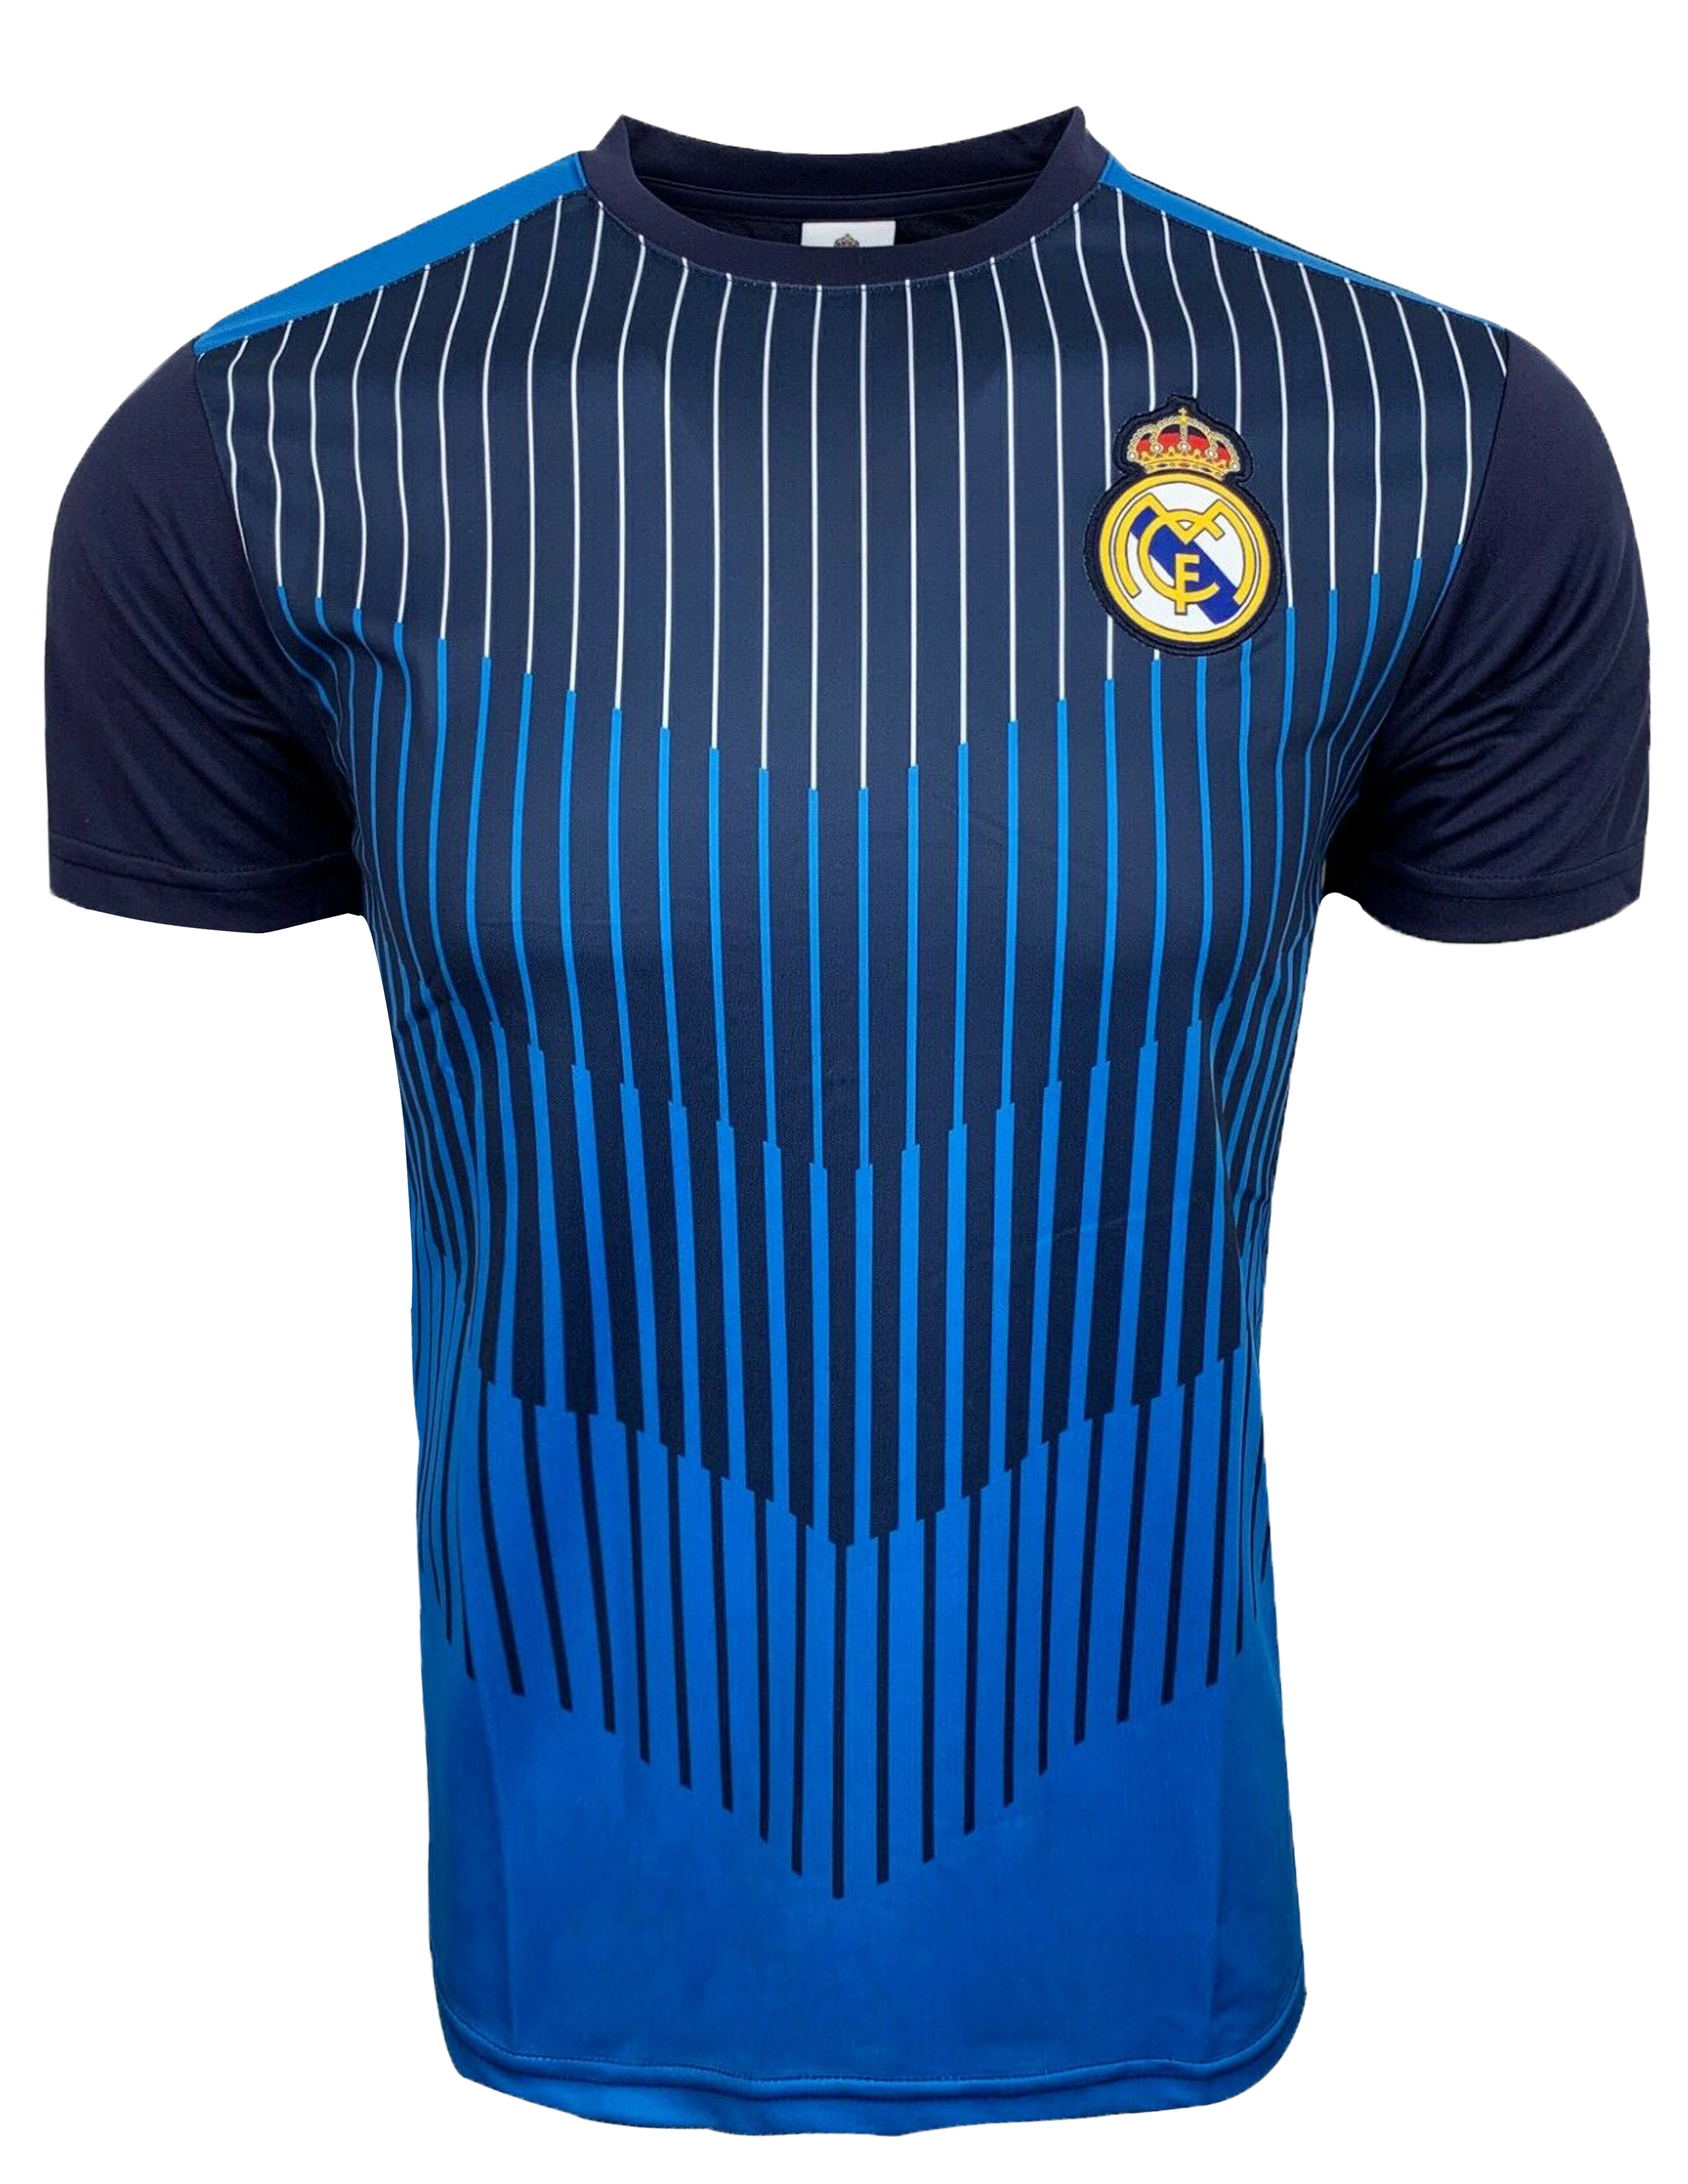 Real Madrid Training Jersey, Adult and Youth Sizes, Licensed Real Madrid Shirt (L) - image 2 of 4